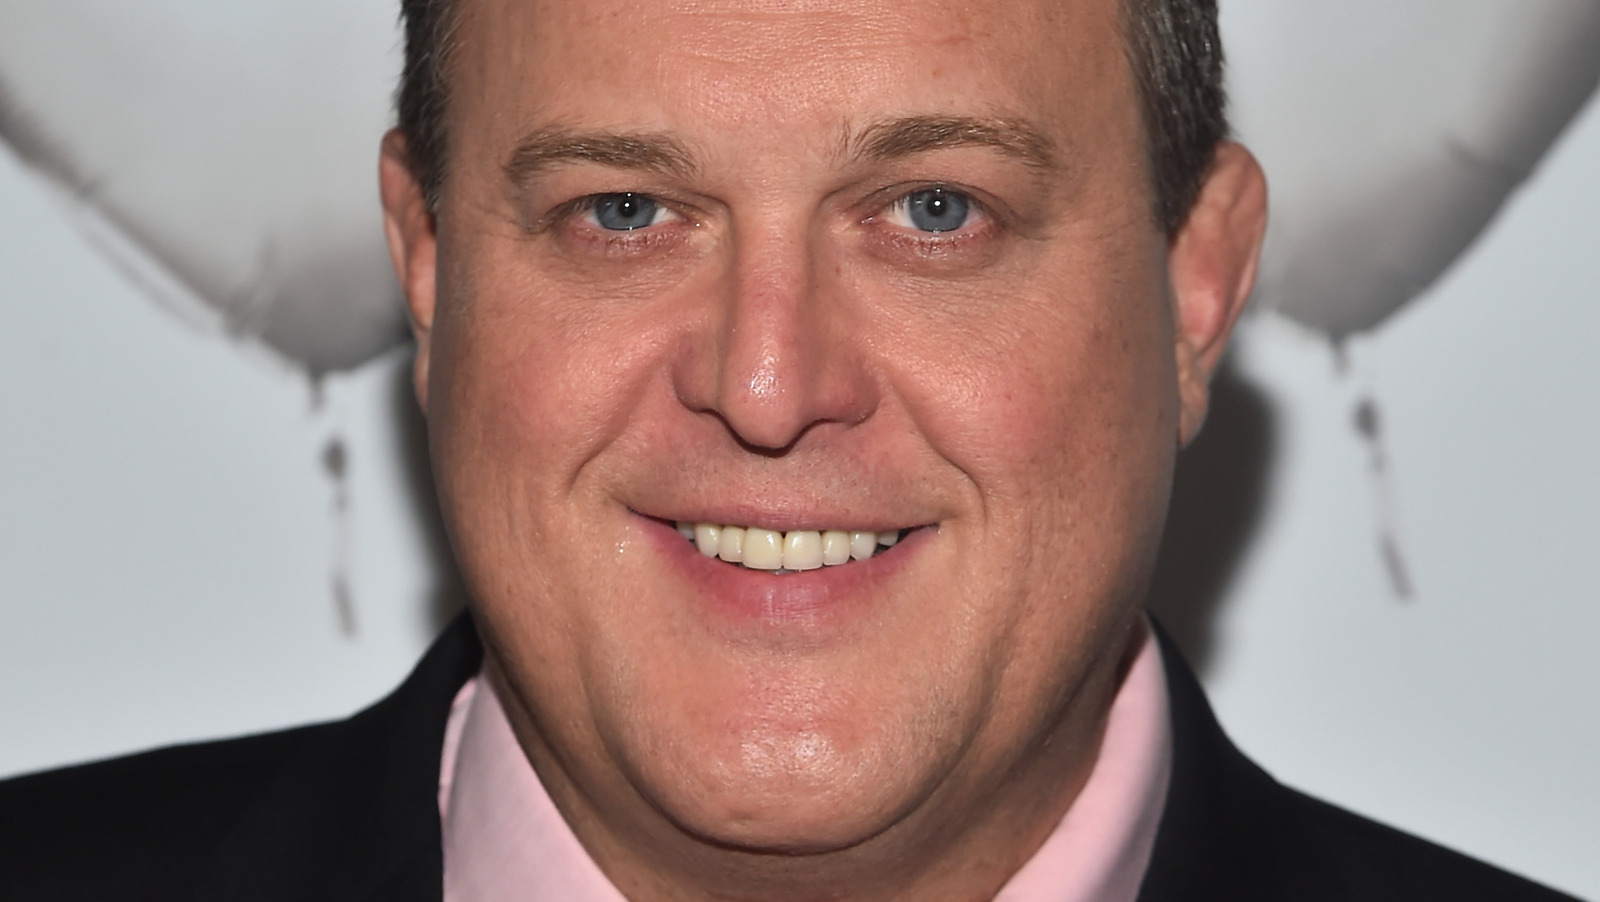 What We Know About Billy Gardell's Weight Loss